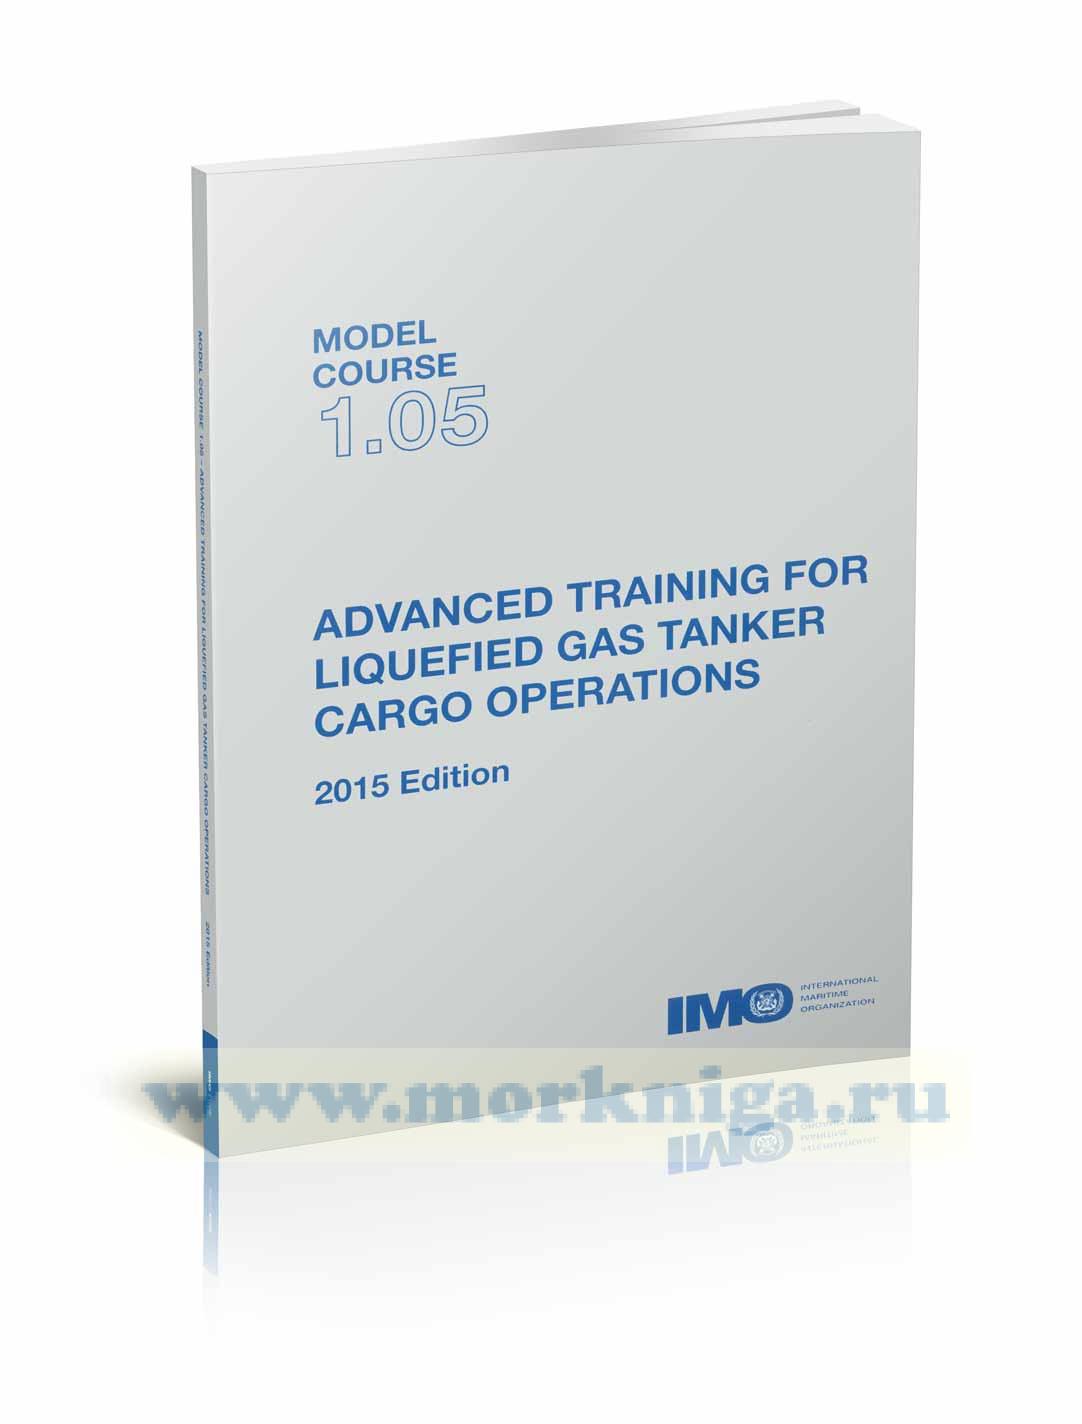 Advanced training for liquefied gas tanker cargo operations. Model course 1.05. 2015 Edition